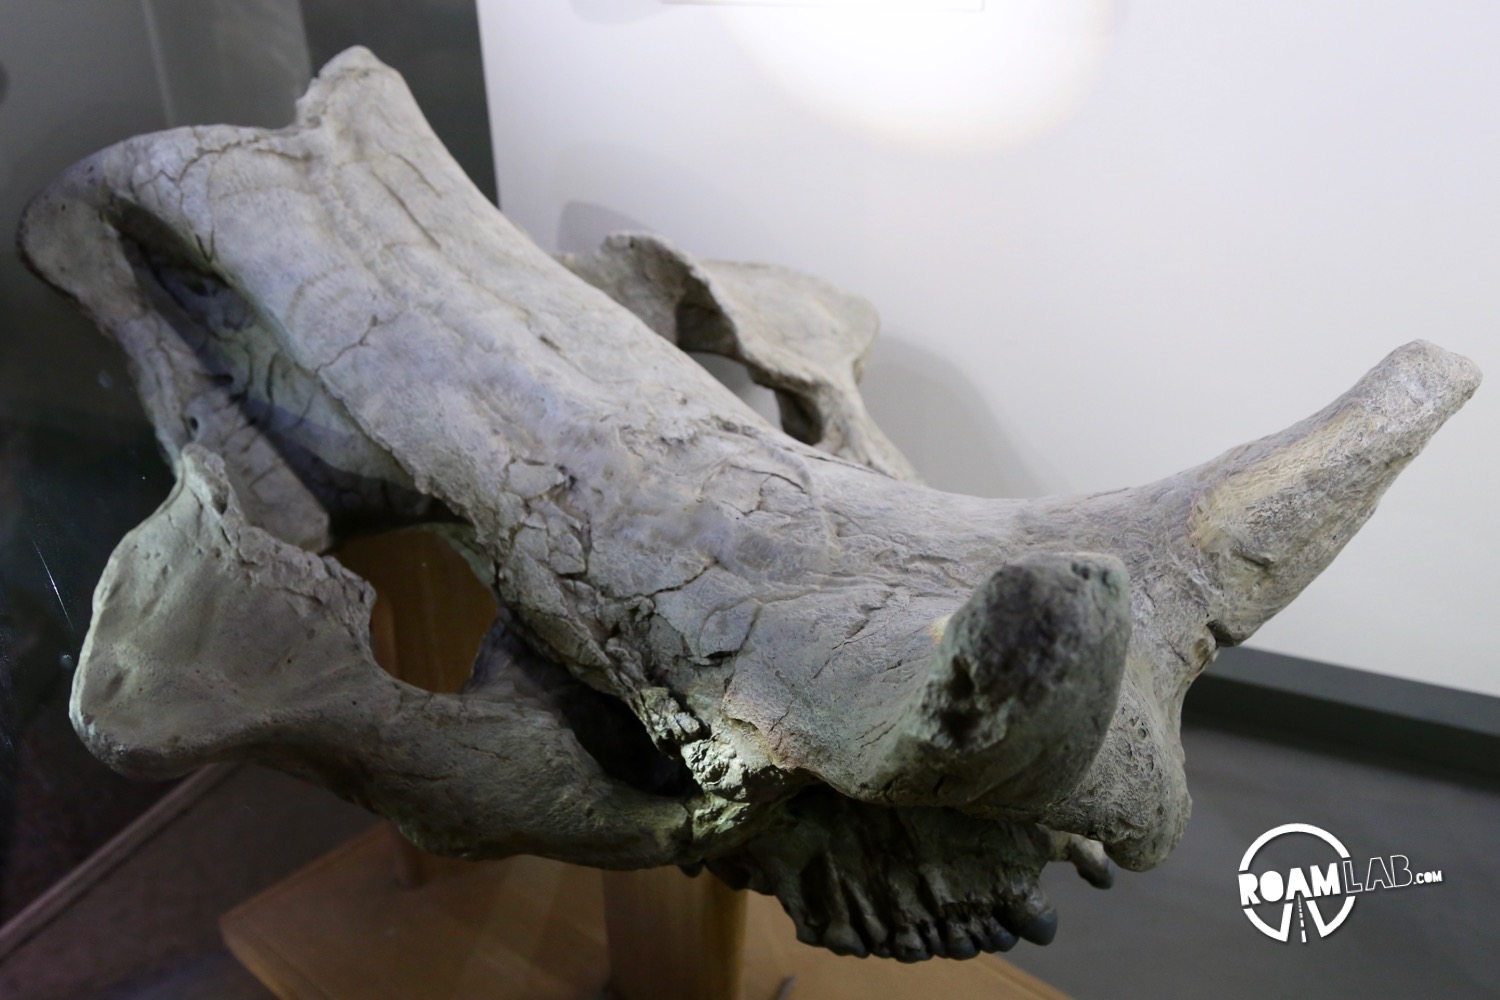 Fossilized skull of a large, pig-like animal known as the Archaeotherium at the Badlands National Park.